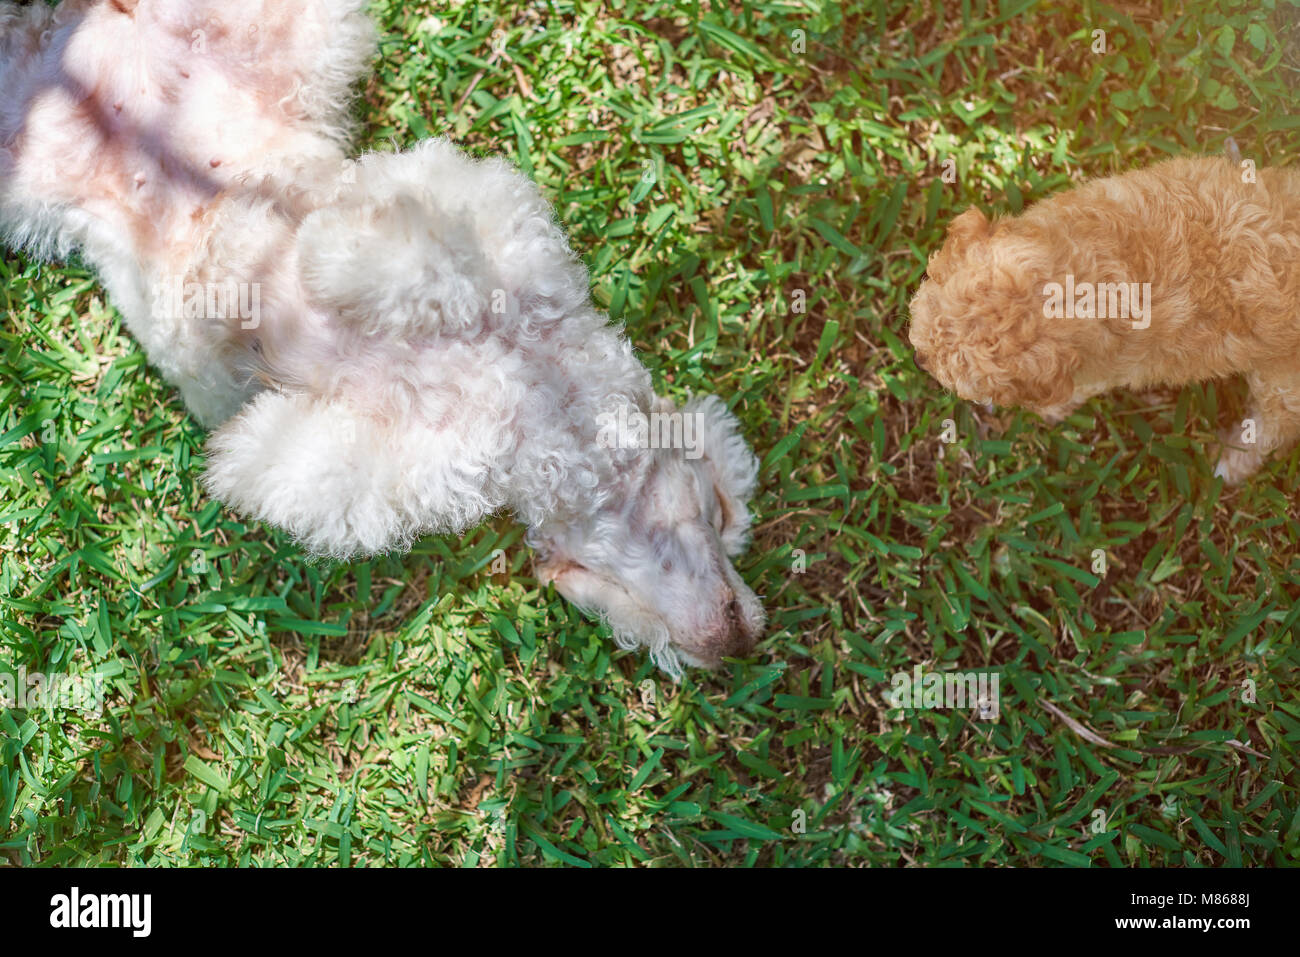 Poopdle mom and puppy on green grass playing together Stock Photo